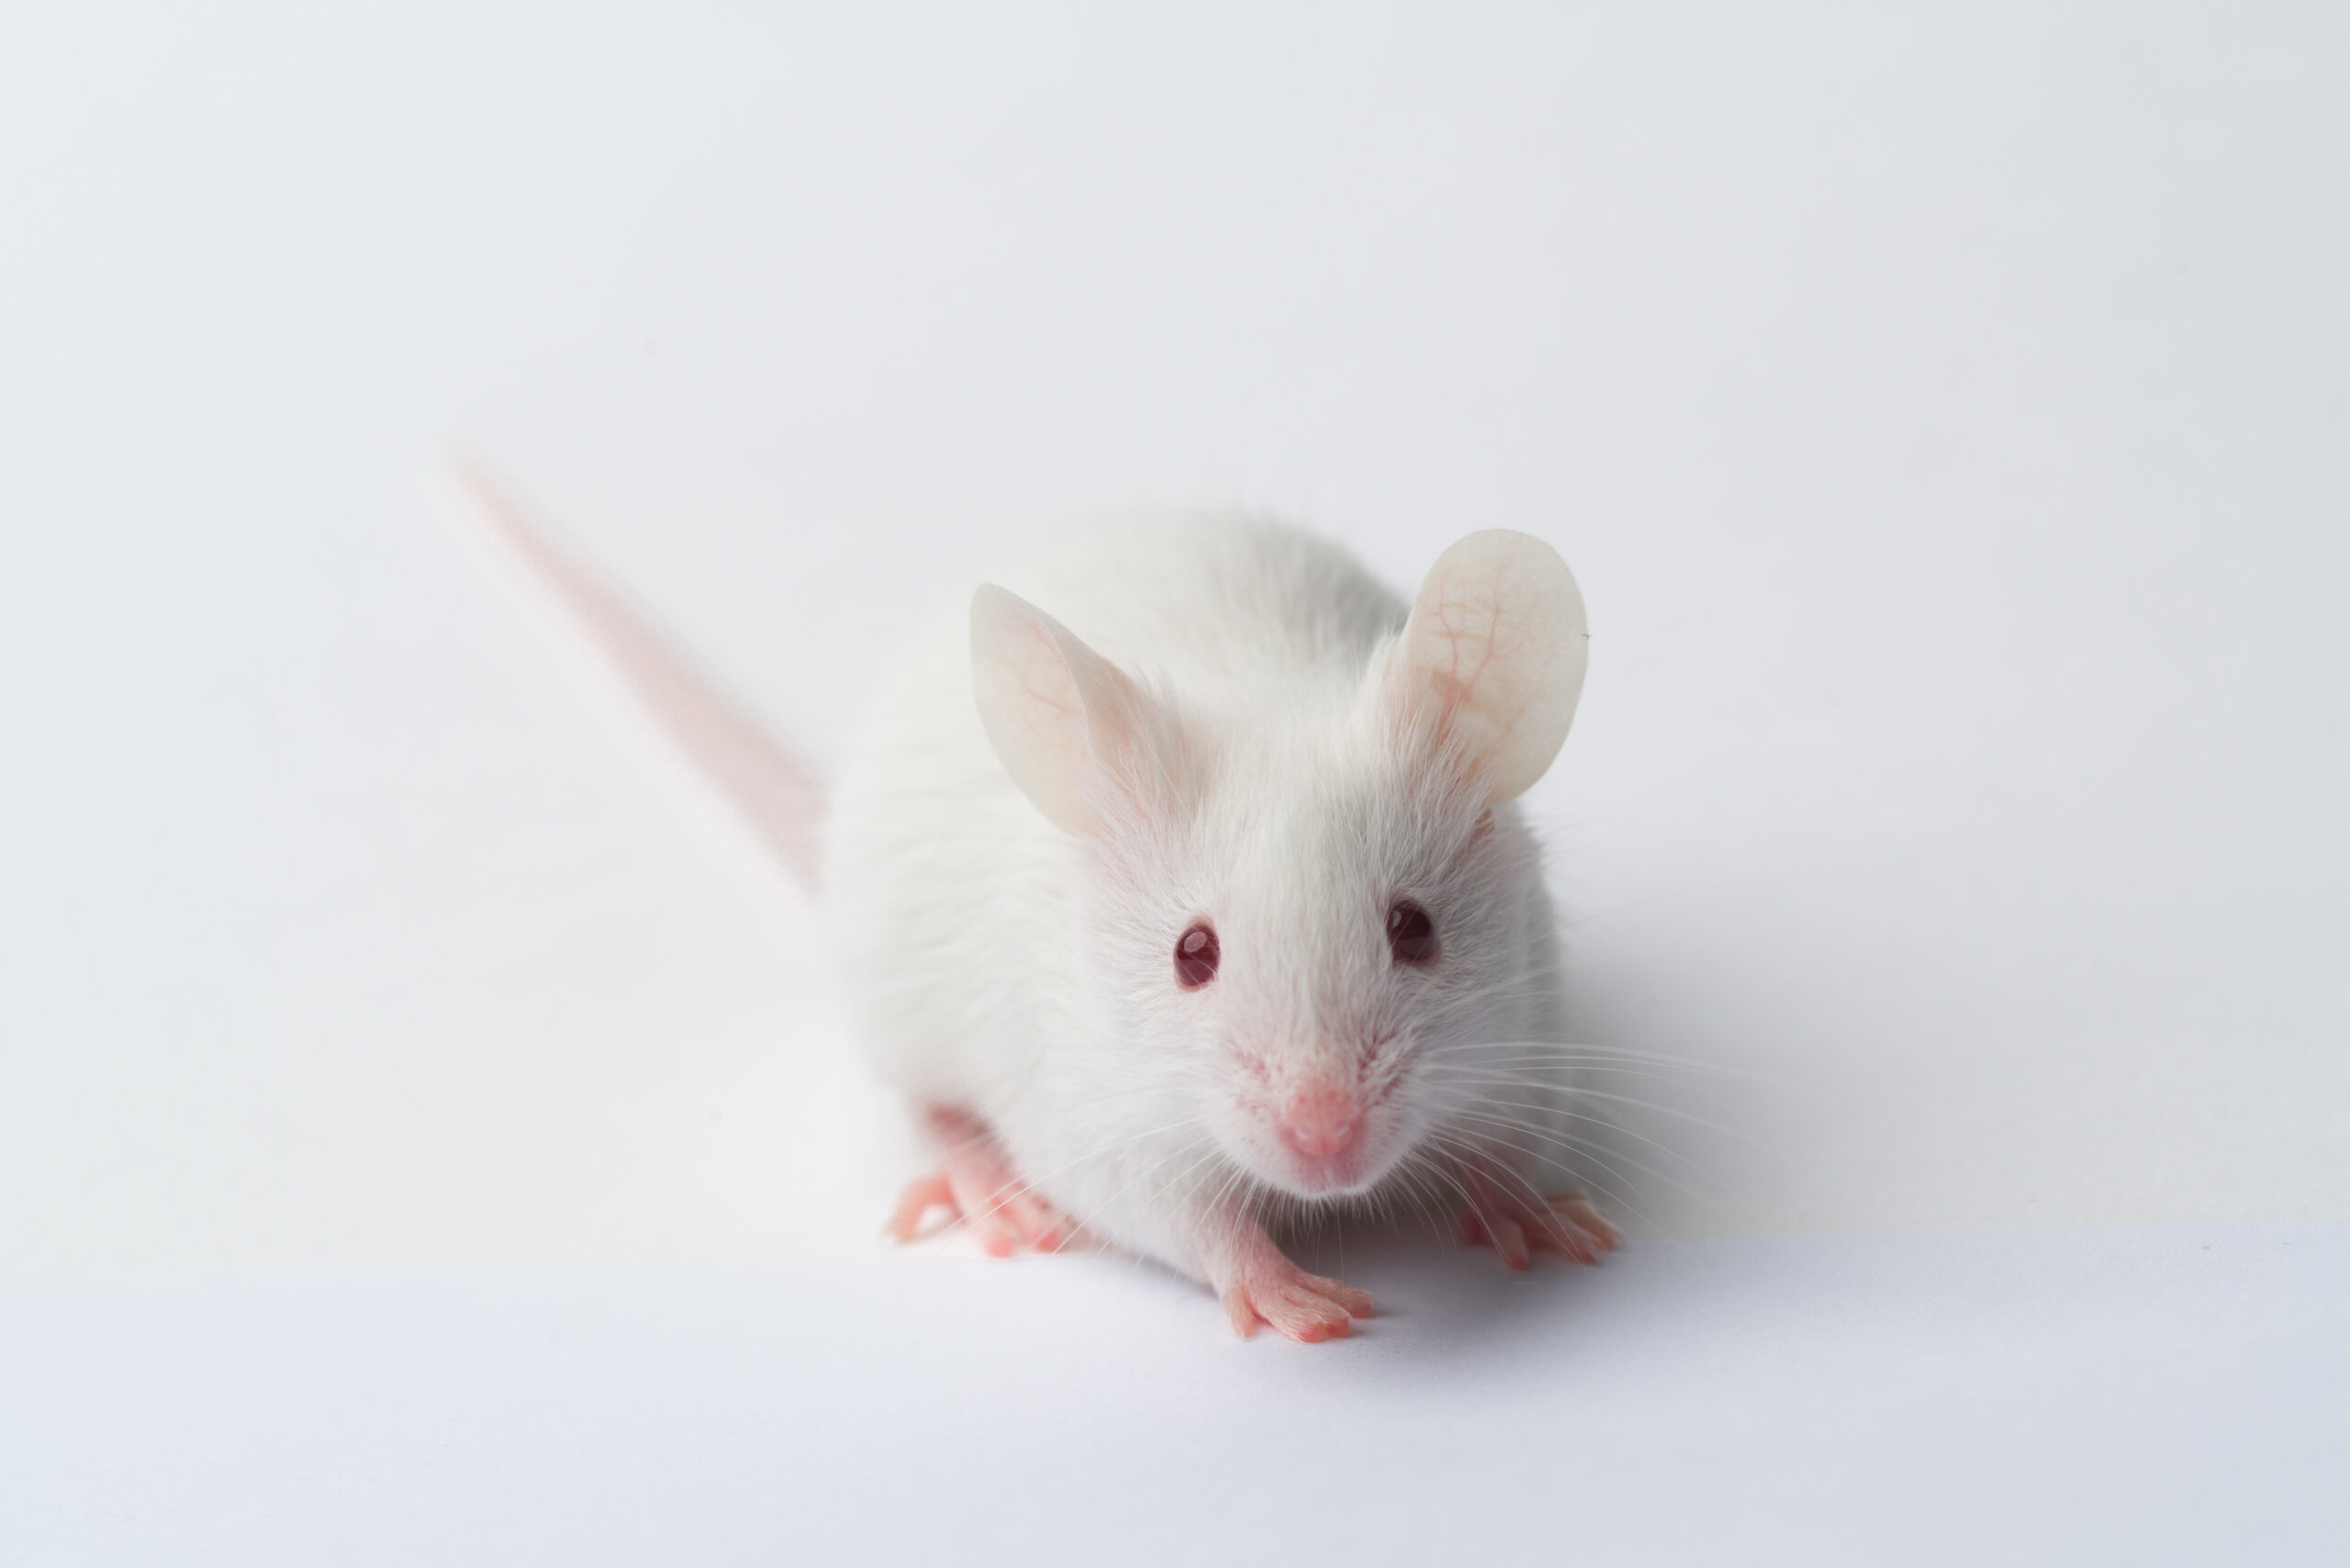 White rodent with red eyes on a white background